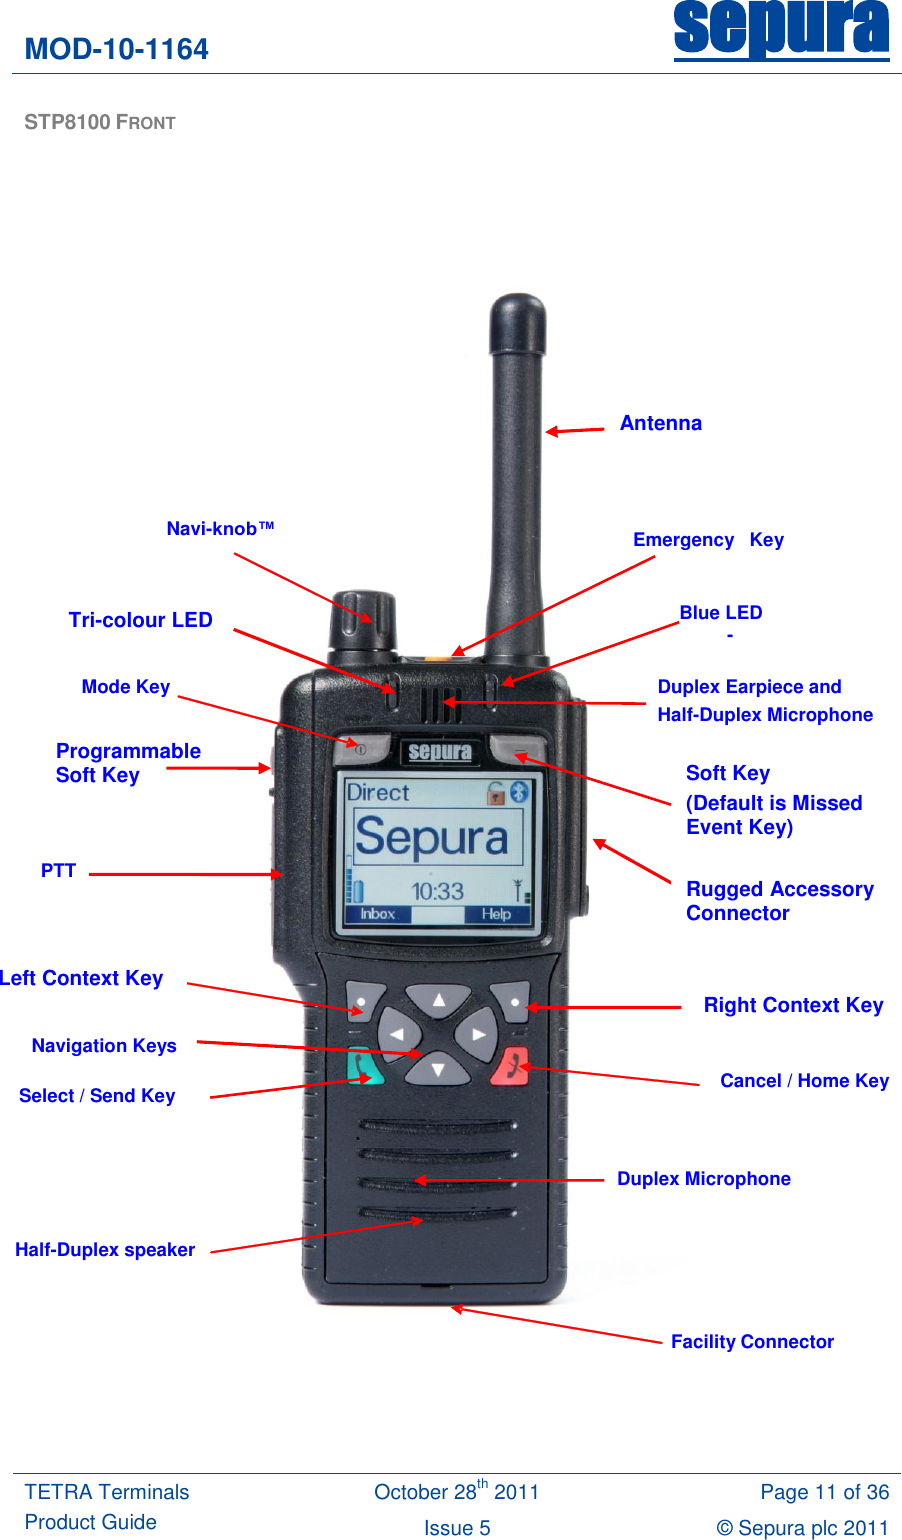 MOD-10-1164 sepura  TETRA Terminals Product Guide October 28th 2011 Page 11 of 36 Issue 5 © Sepura plc 2011   STP8100 FRONT  Emergency   Key  Navi-knob™  Mode Key PTT  Navigation Keys Select / Send Key Duplex Earpiece and  Half-Duplex Microphone    -  Cancel / Home Key   Half-Duplex speaker  Facility Connector Duplex Microphone - Blue LED Antenna Left Context Key Right Context Key Programmable Soft Key  Tri-colour LED Soft Key (Default is Missed Event Key) Rugged Accessory Connector 